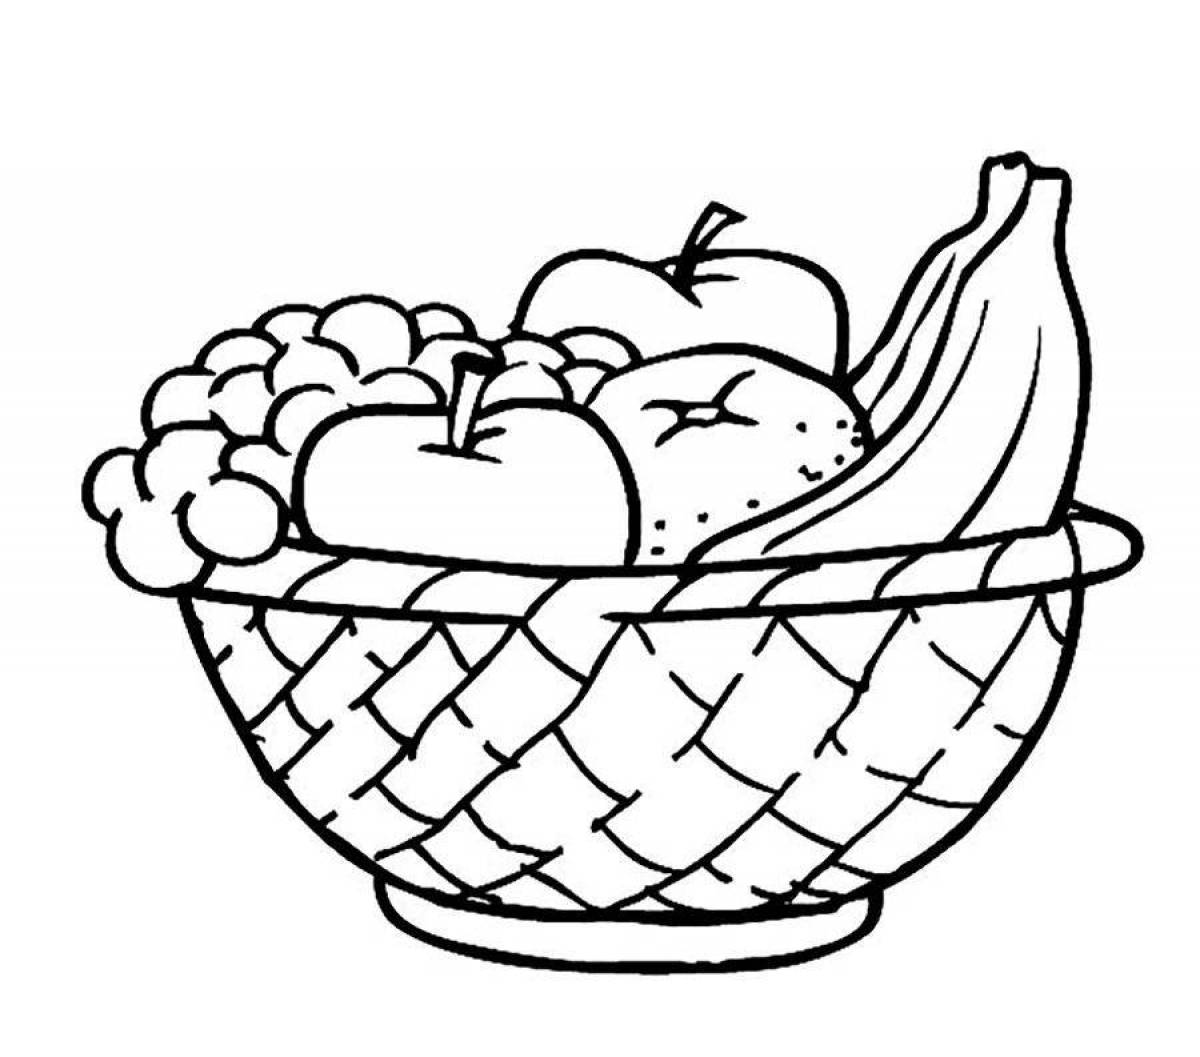 Coloring book spicy fruit basket